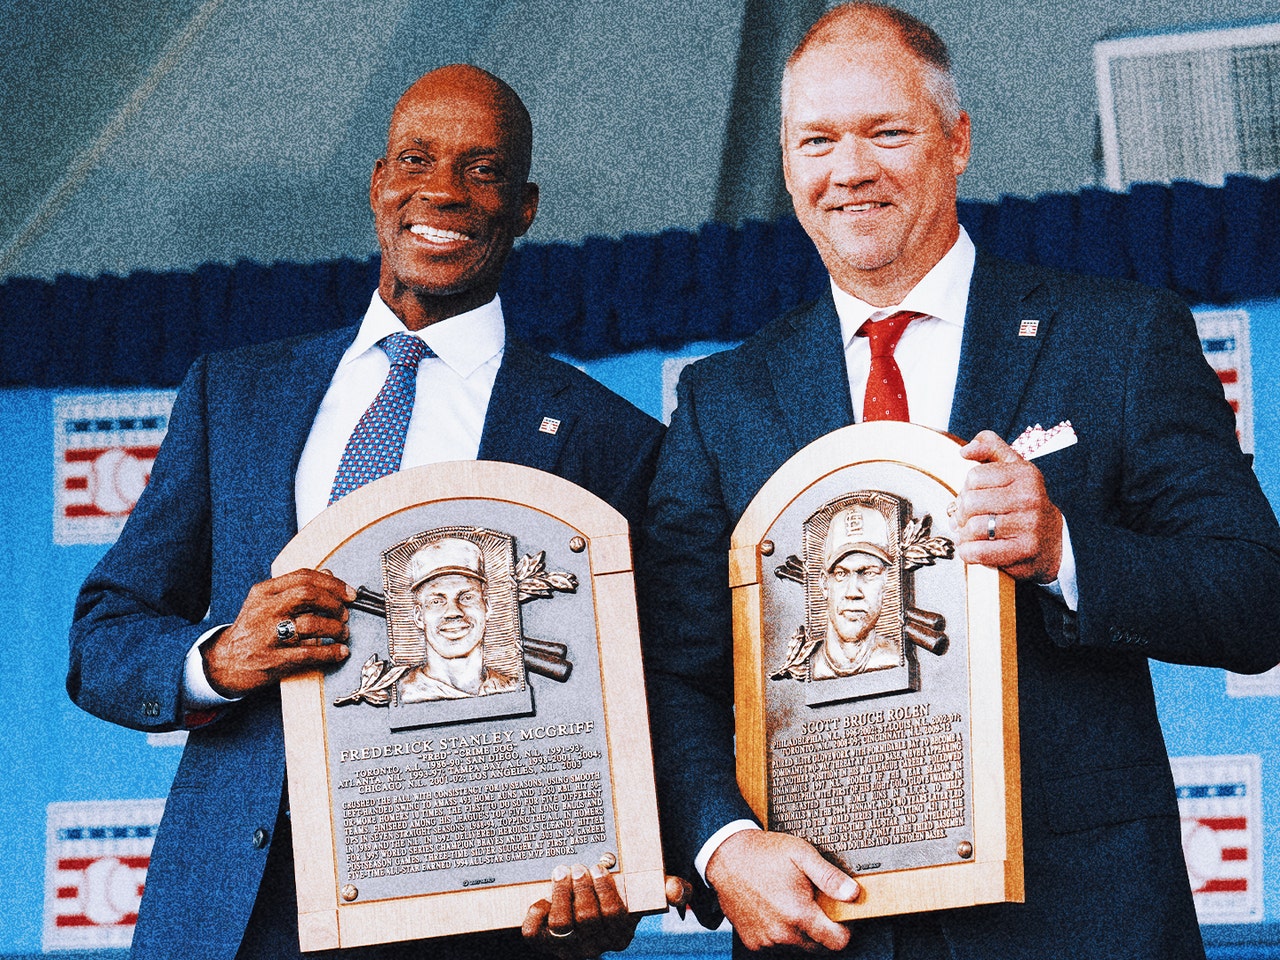 Scott Rolen and Fred McGriff finally got the HOF inductions they